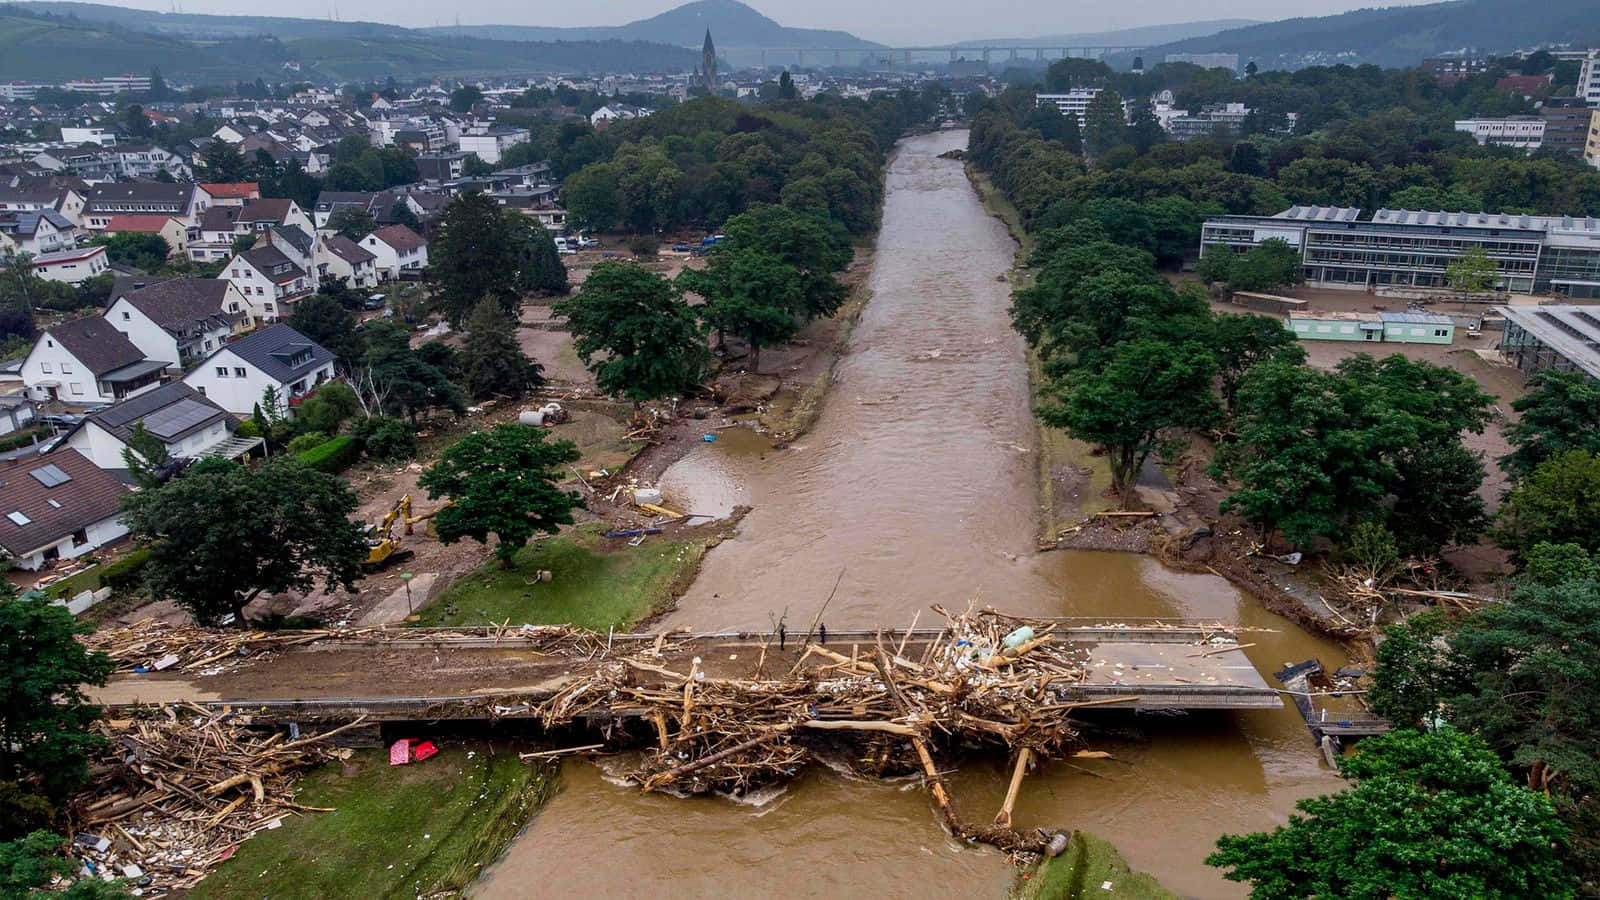 A Bridge Is Destroyed In A Flood